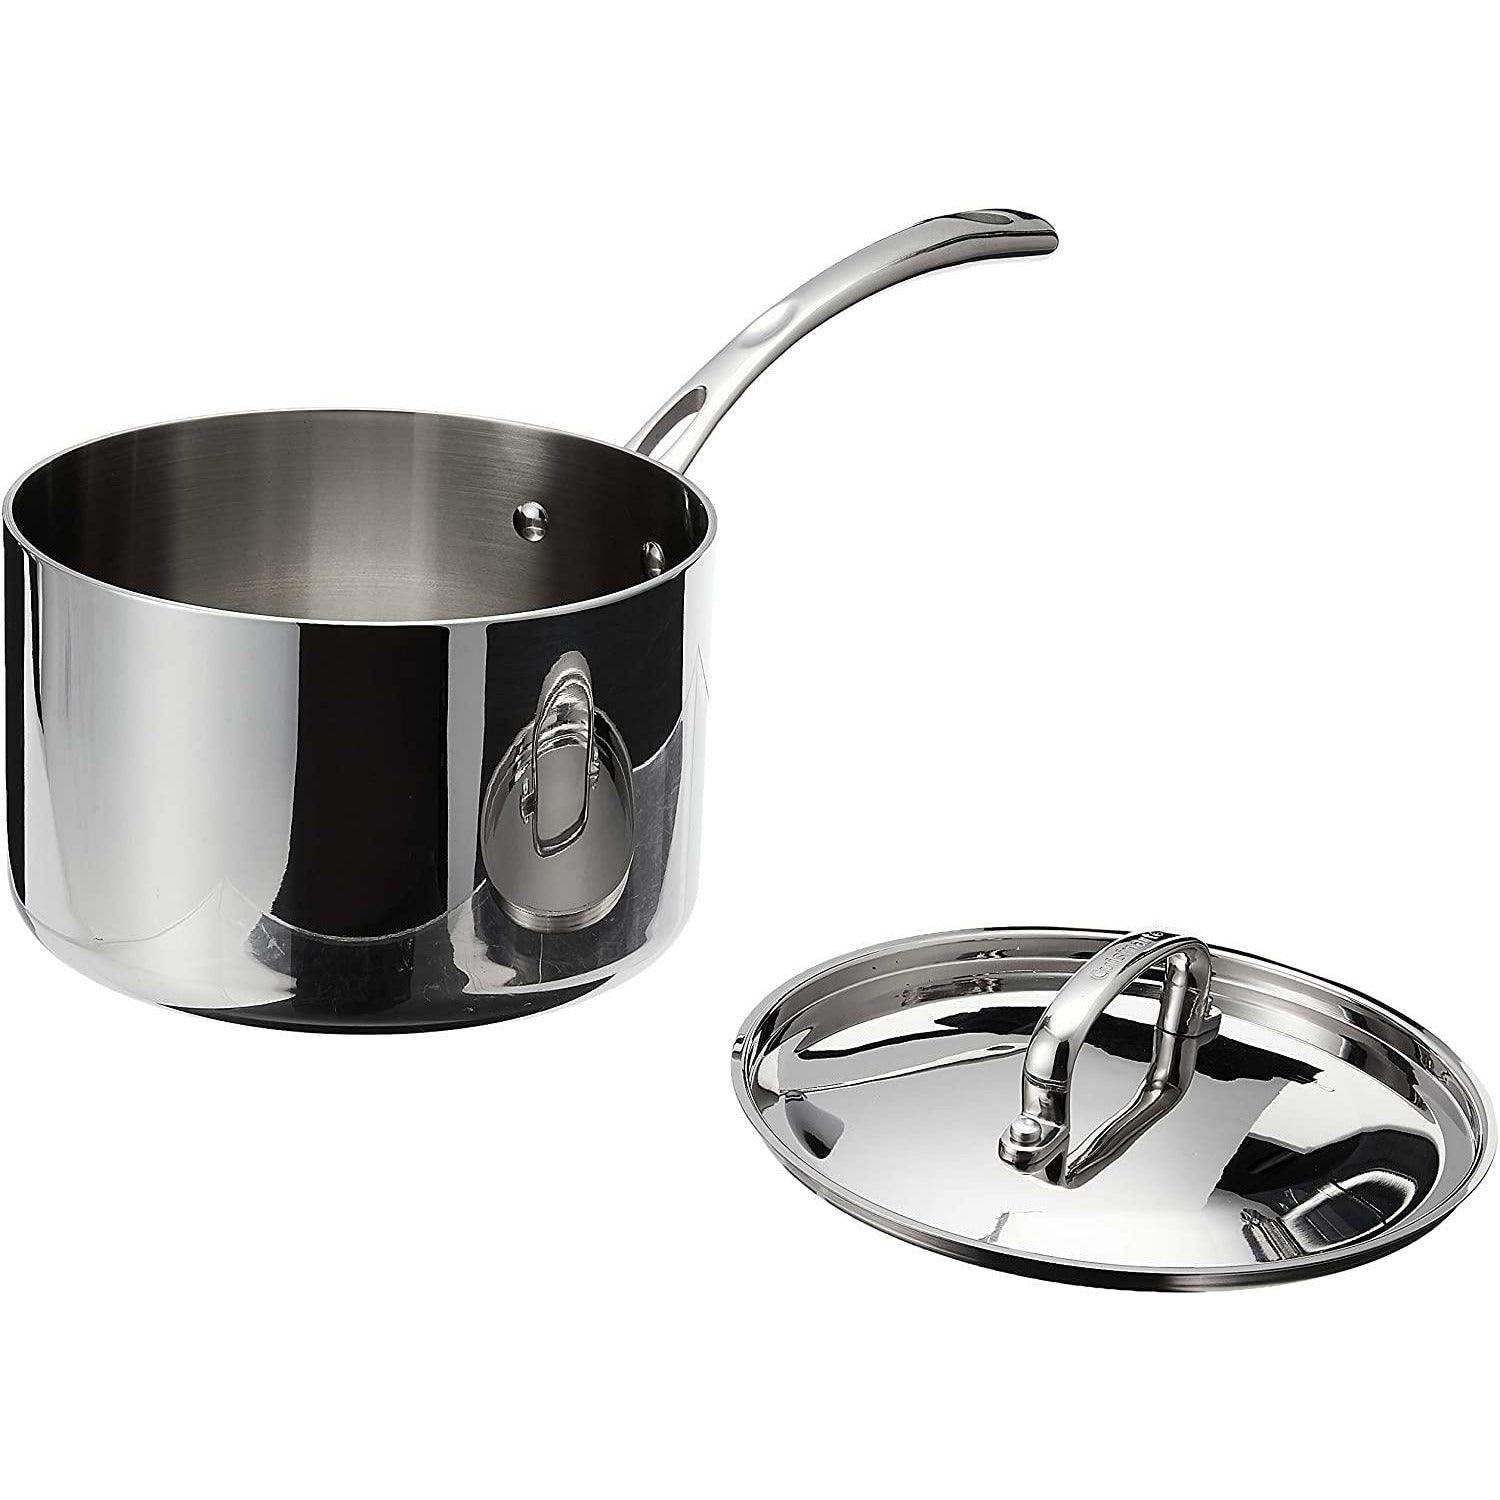 Cuisinart French Classic Tri-Ply Stainless 4-Quart Saucepot with